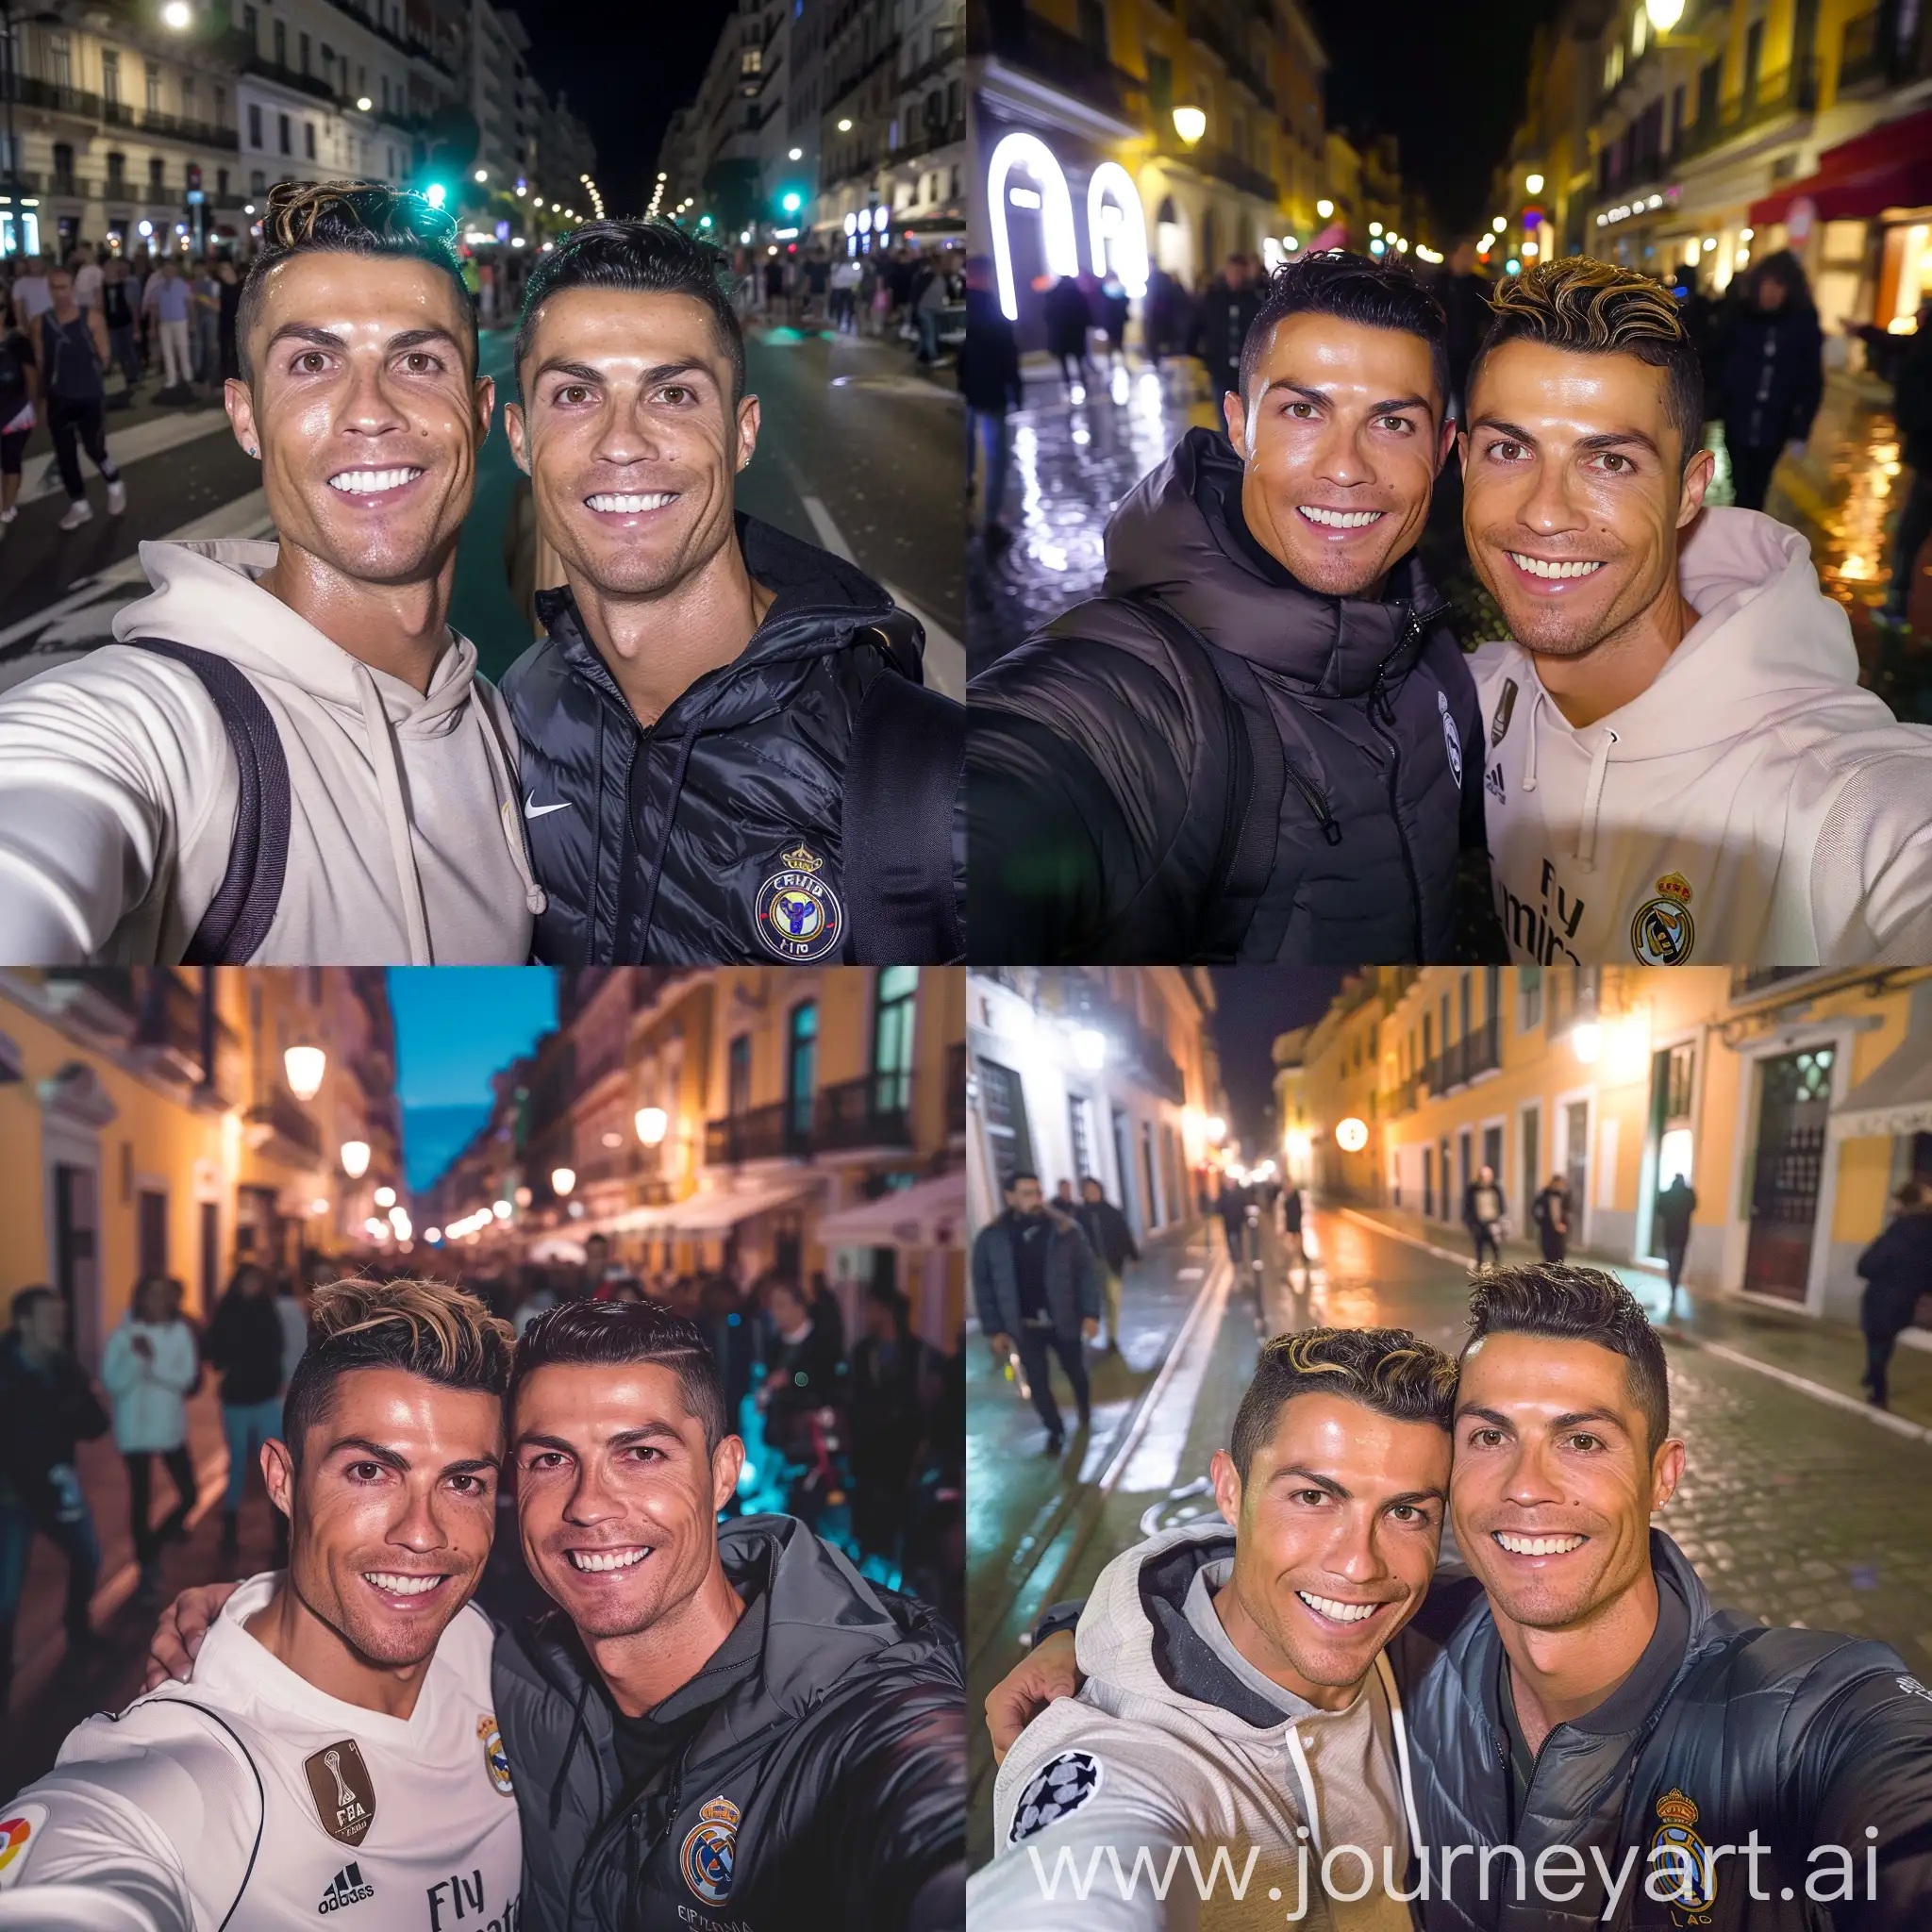 photo taken by a smartphone front selfie camera of donald t and cristiano ronaldo together taking a selfie, smiling, streets, night